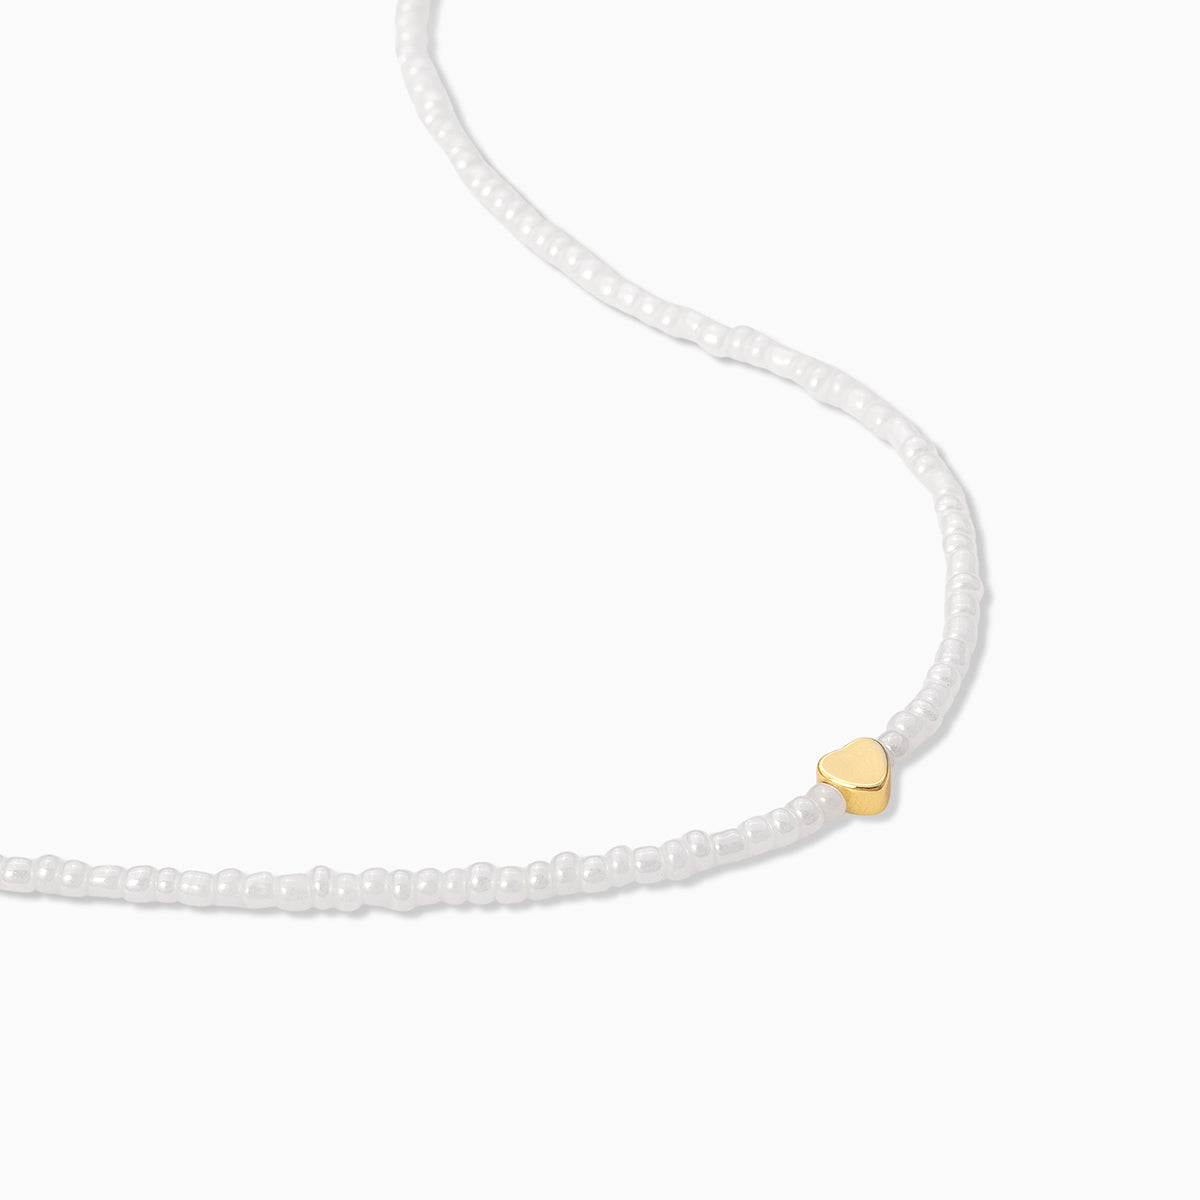 With Love Beaded Necklace | Gold | Product Detail Image | Uncommon James